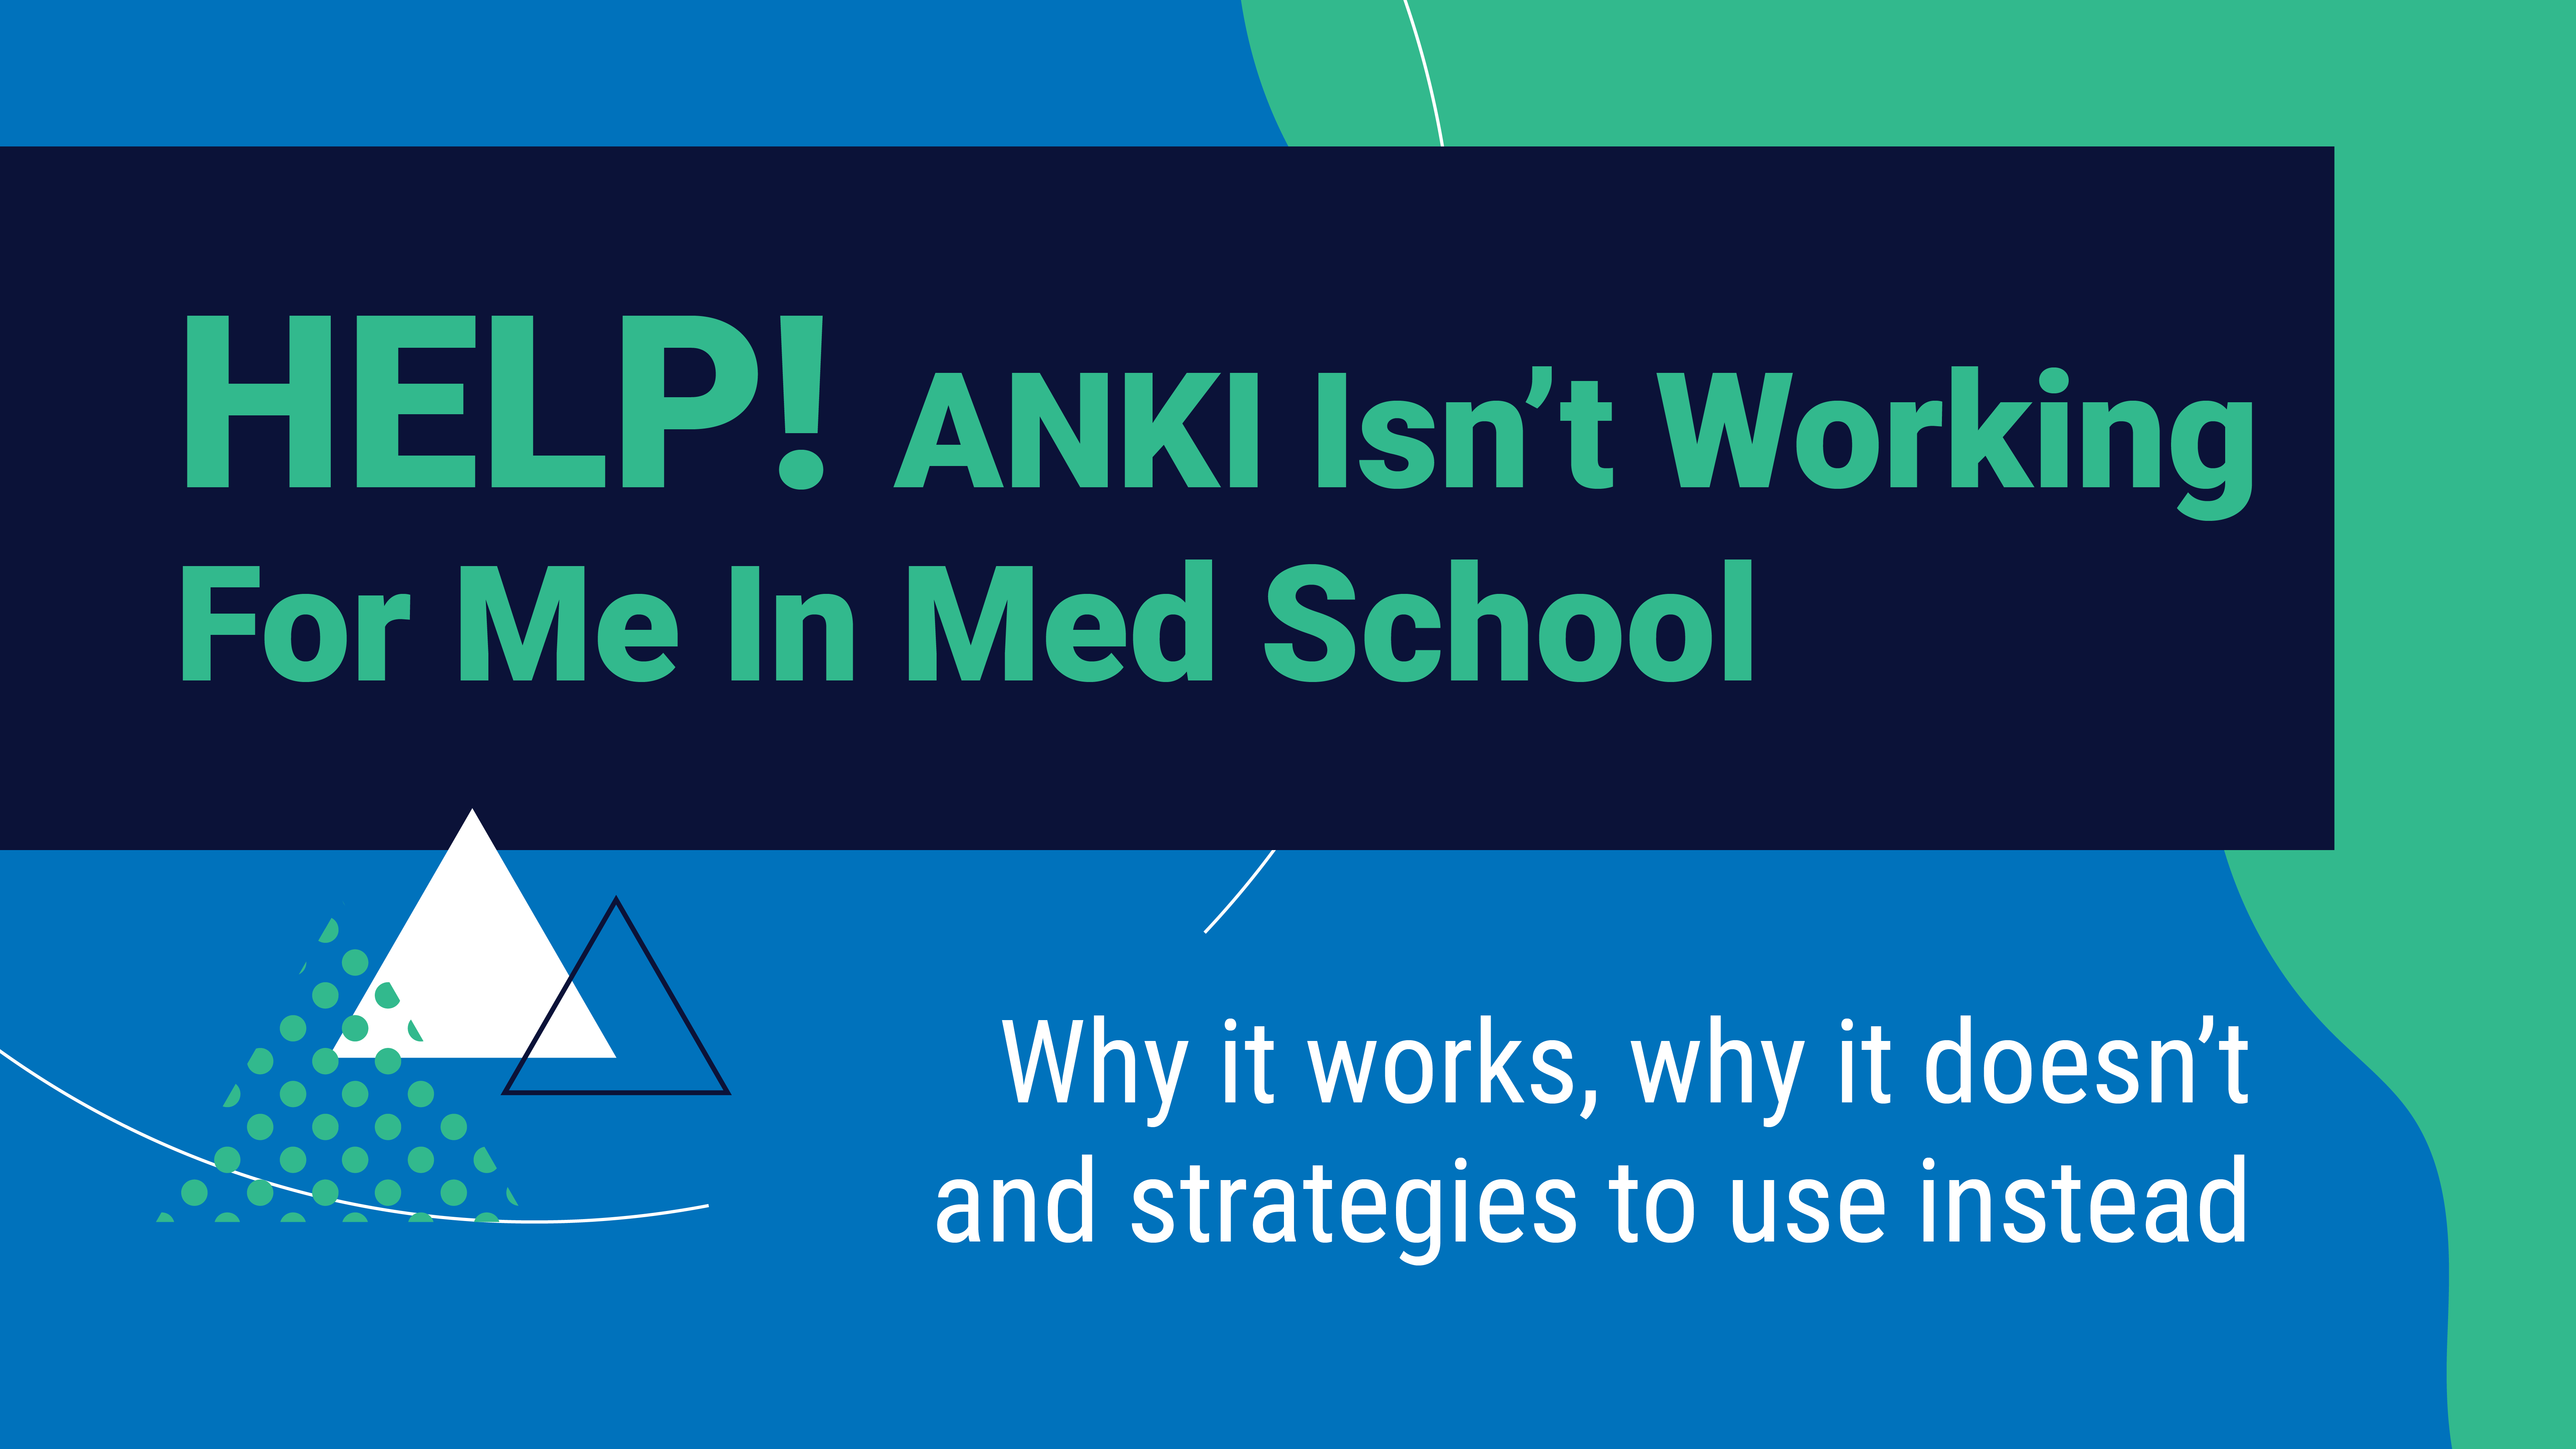 Featured image for “Help! Anki Isn’t Working For Me In Med School”